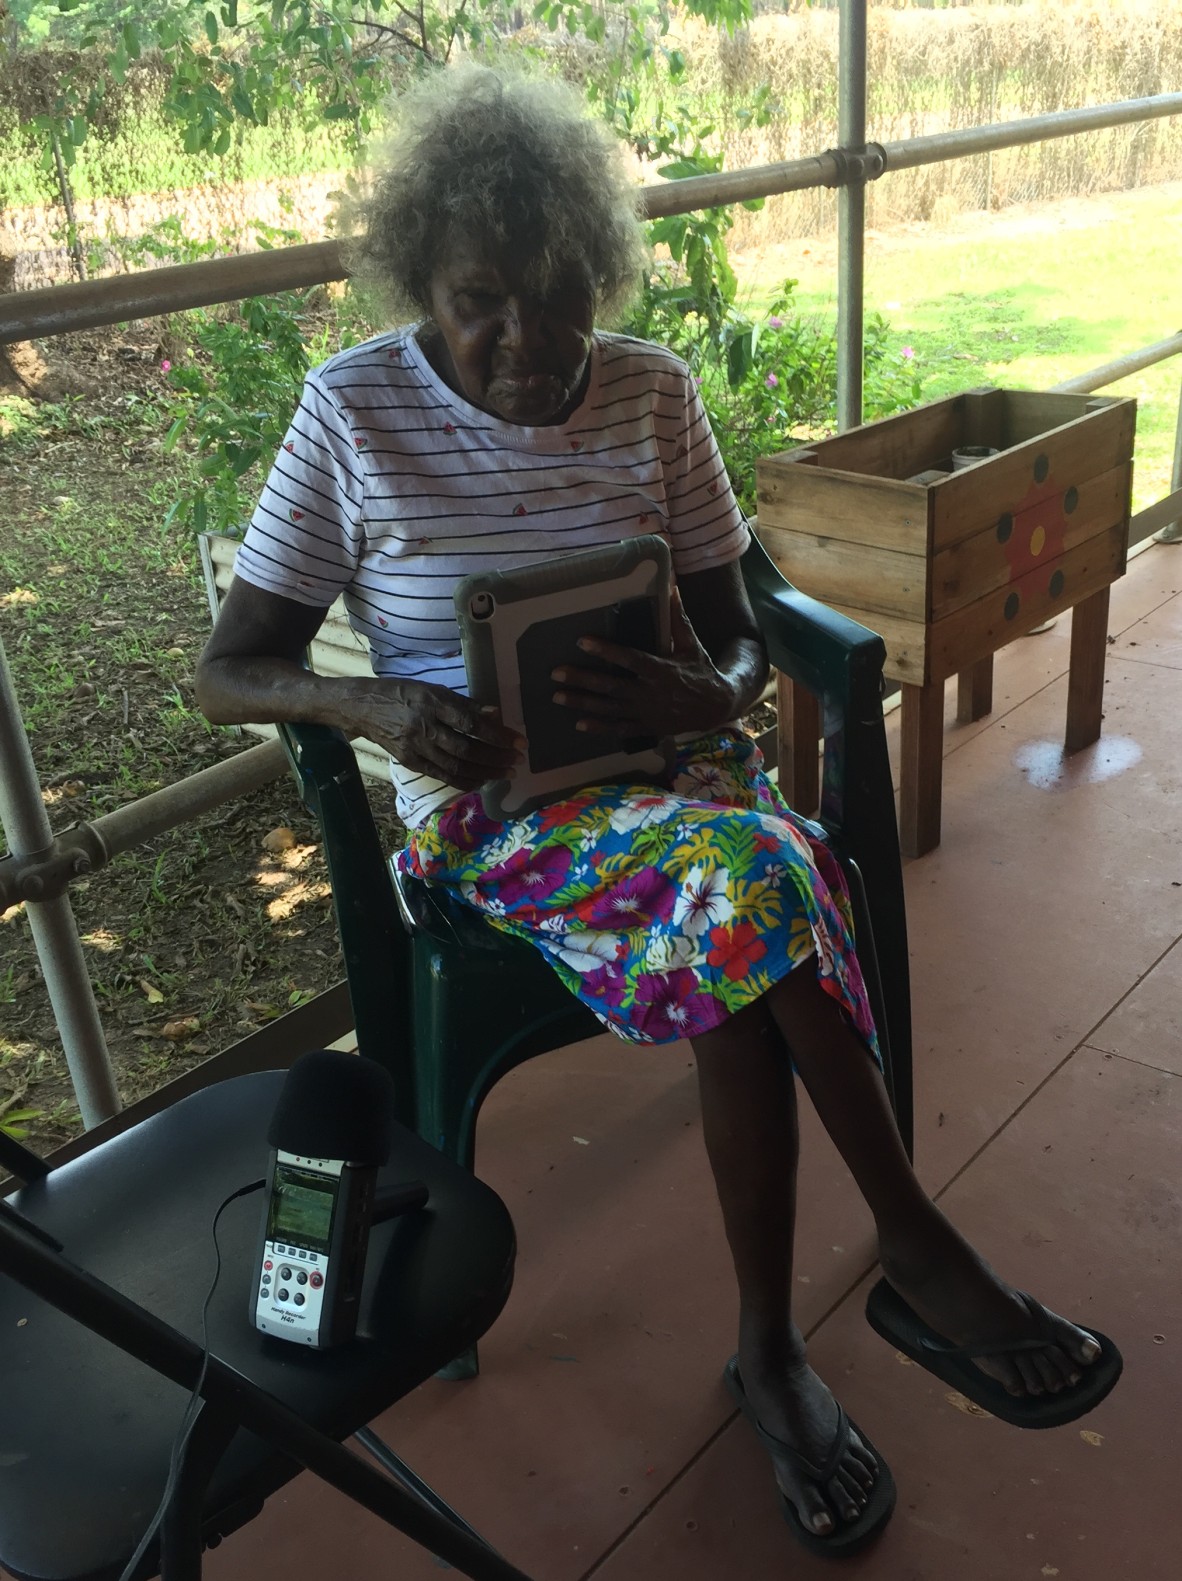 Nita Yunkaporta accessing the ASC Keeping Culture Archive as part of the Tech Savvy Seniors and Deadly Digital Communities projects